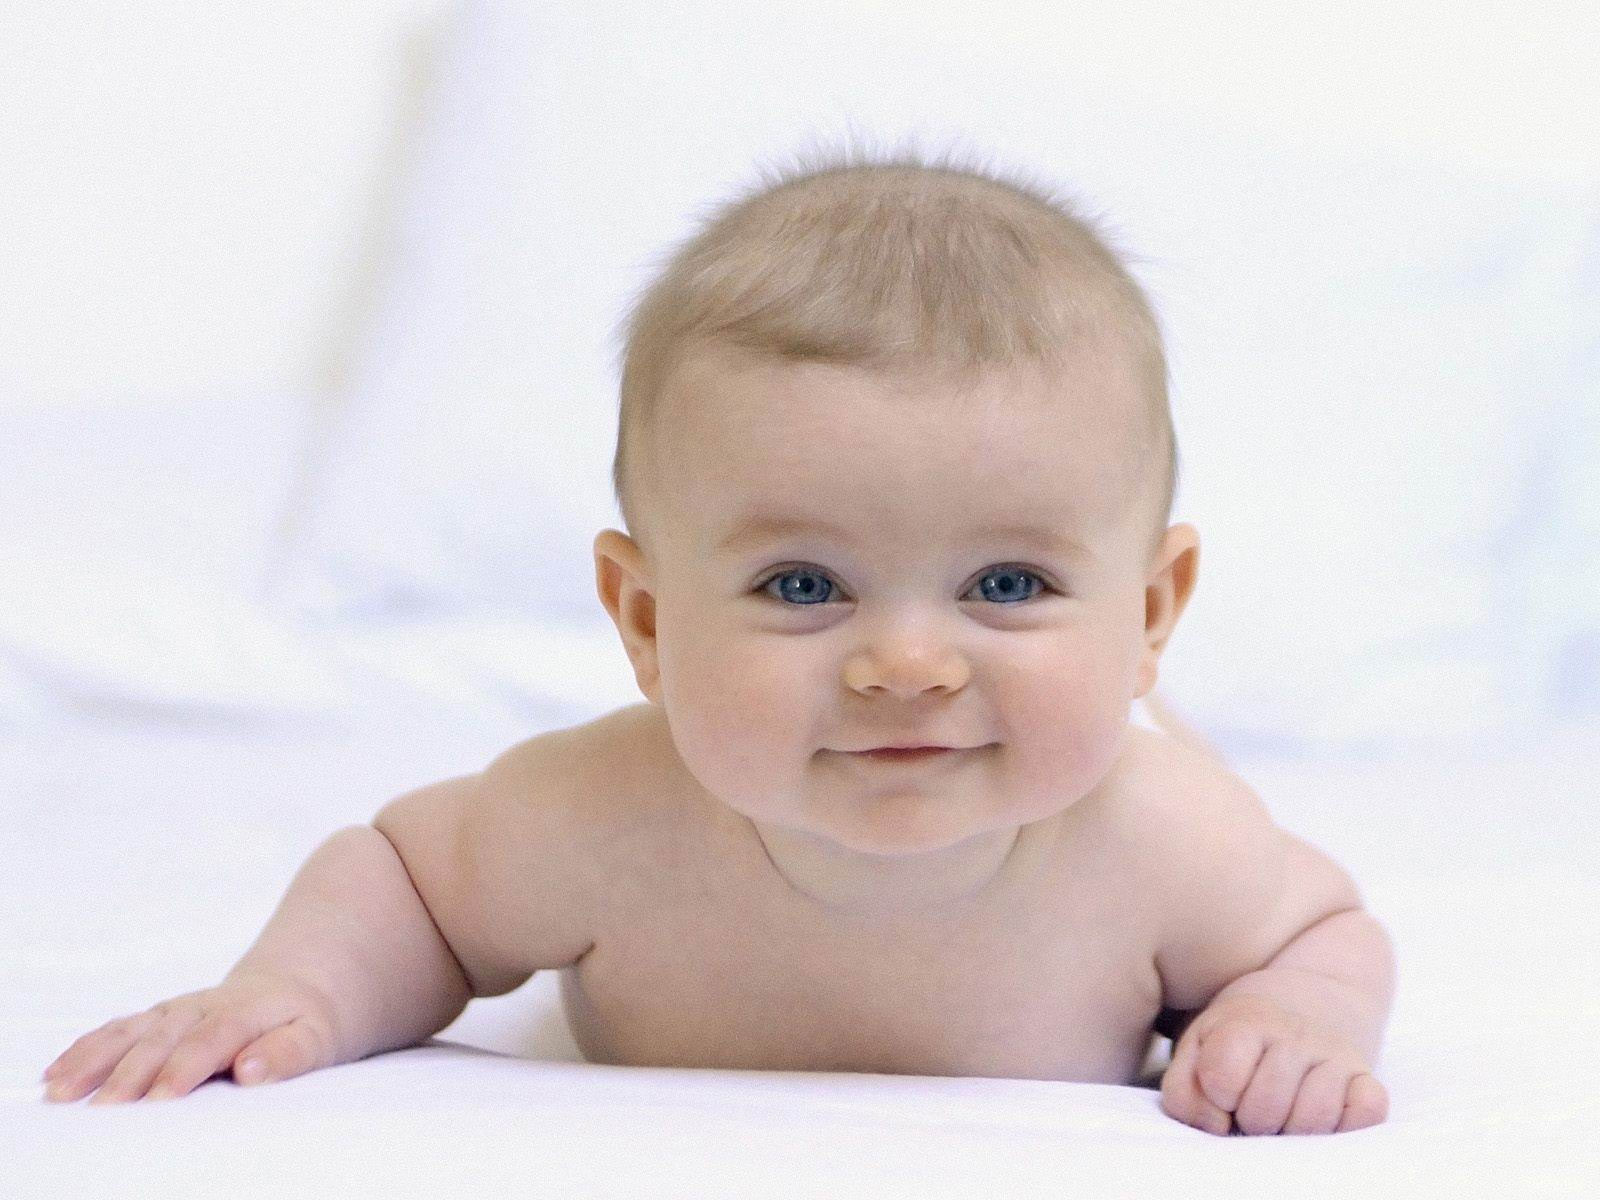 Cute Kids Wallpaper Smiling Crying Babies New Baby